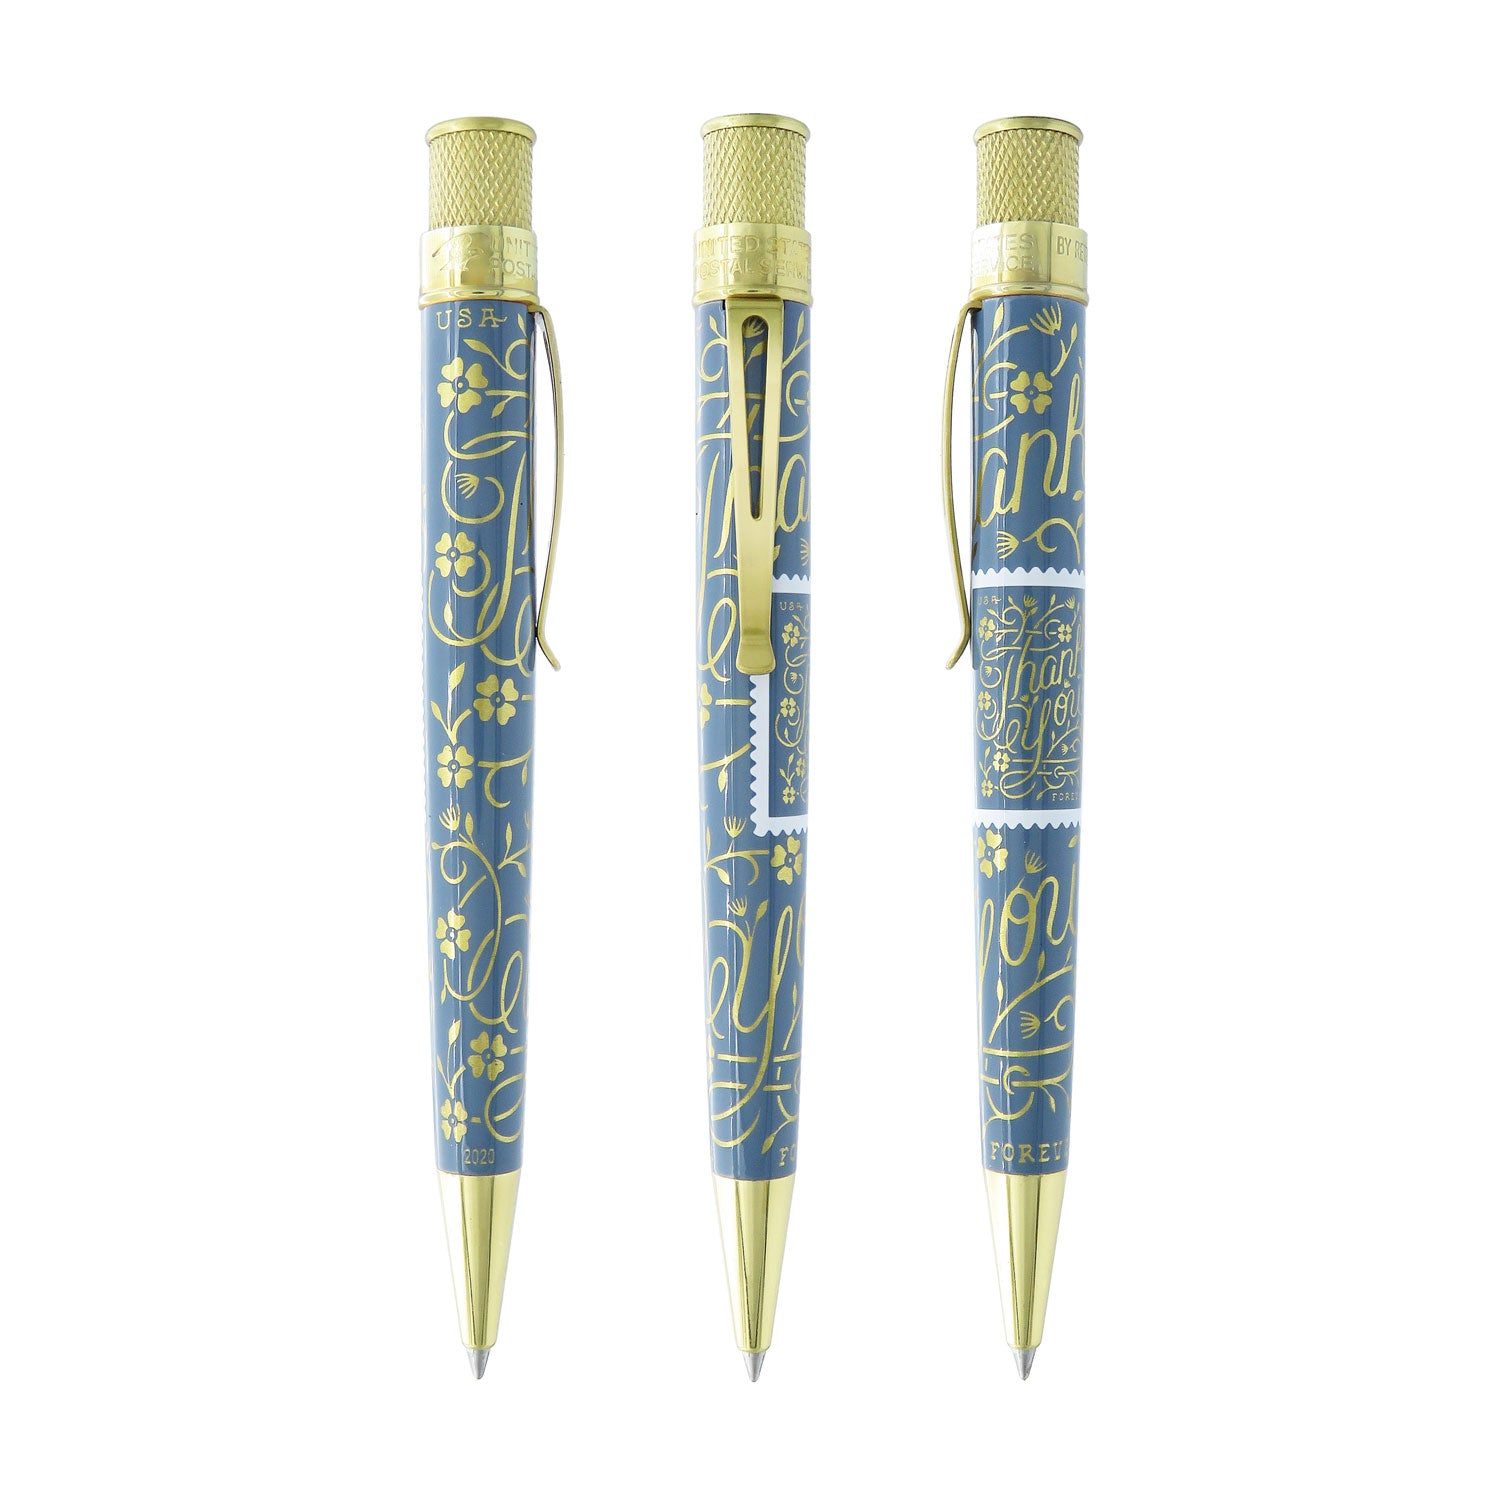 Retro51 Officially Licensed United States Postal Service "Thank You" Stamp Rollerball Pen